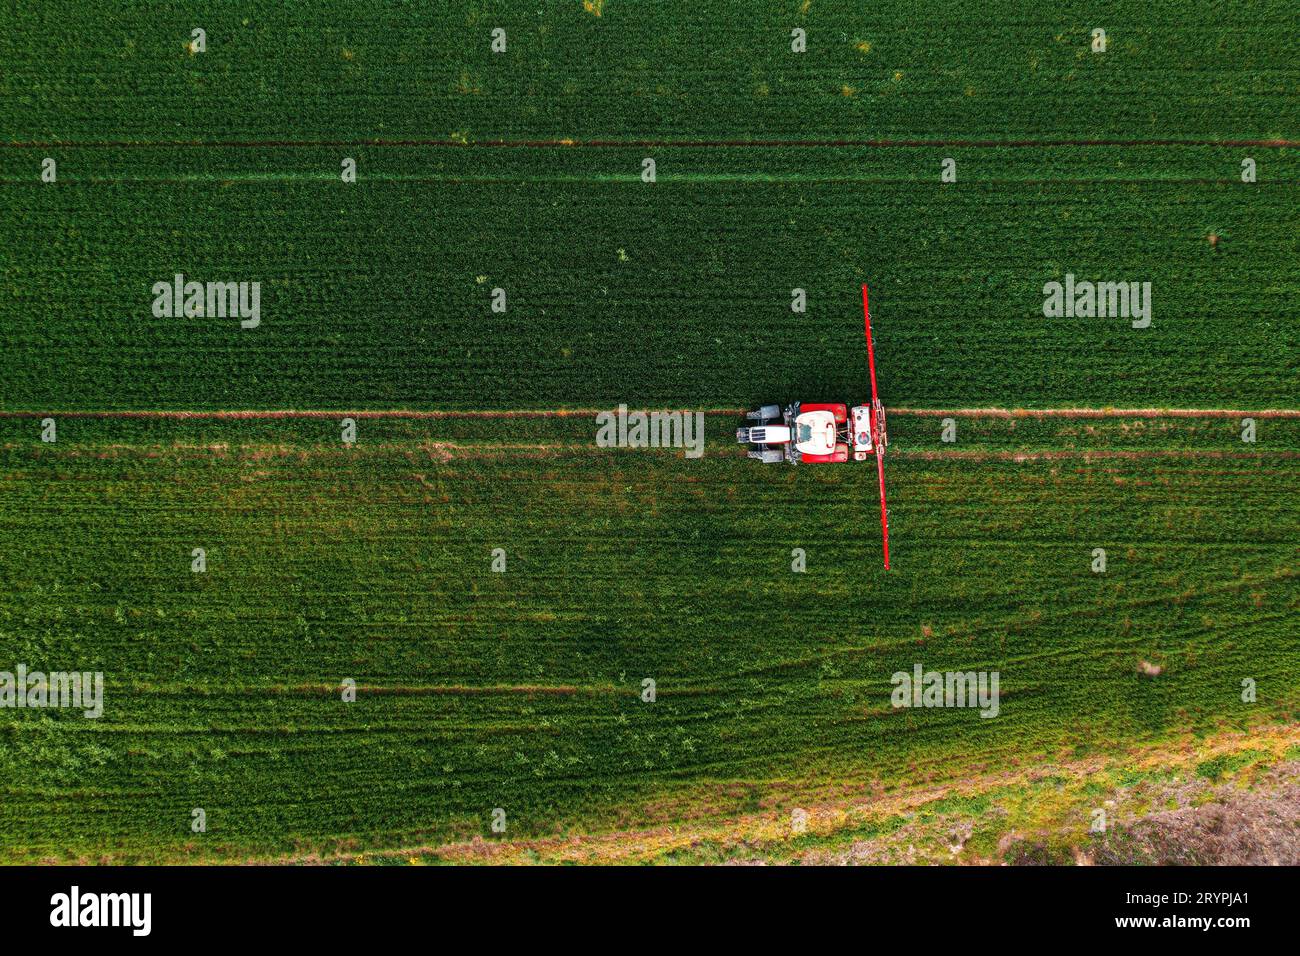 Aerial shot of tractor with crop sprayer attached in wheat grass field, drone pov top view Stock Photo